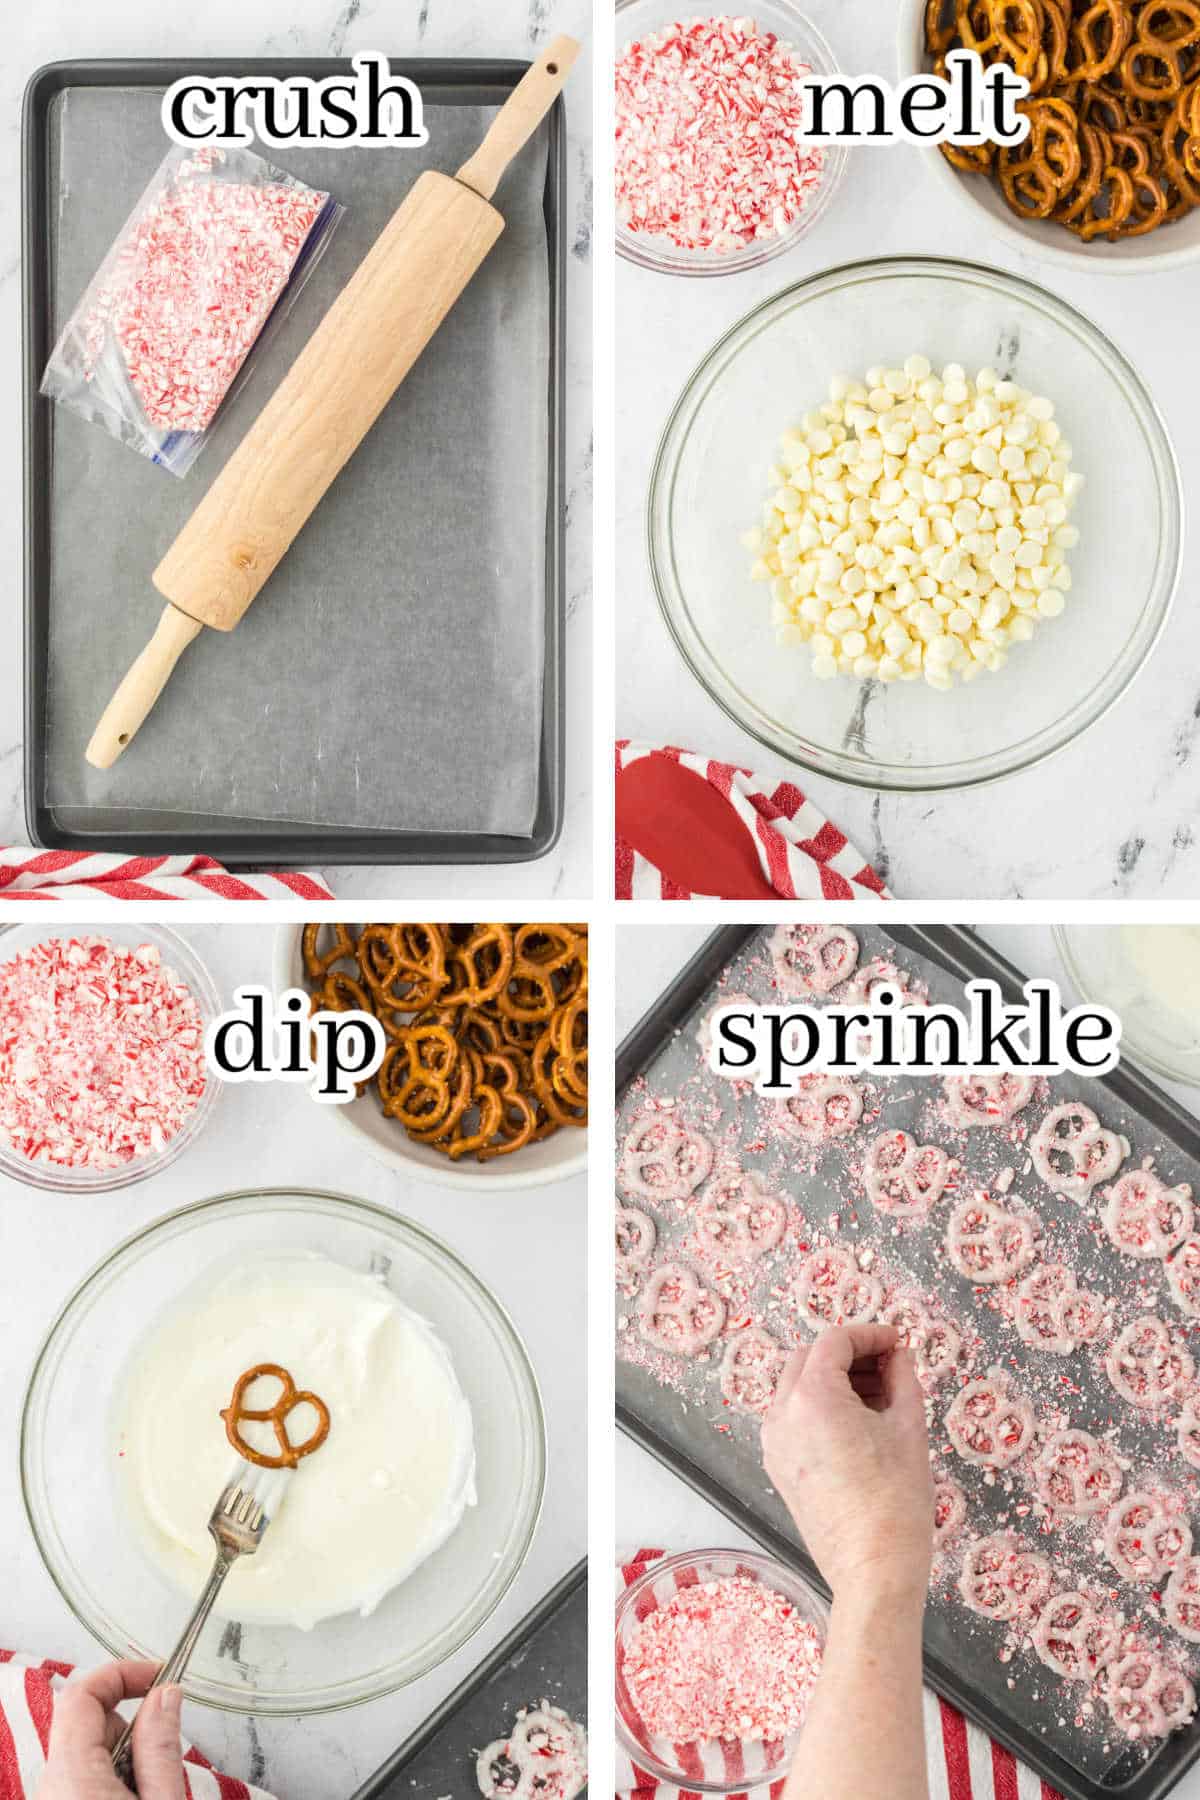 Step-by-step instructions to make the candy recipe. With print overlay for clarification.